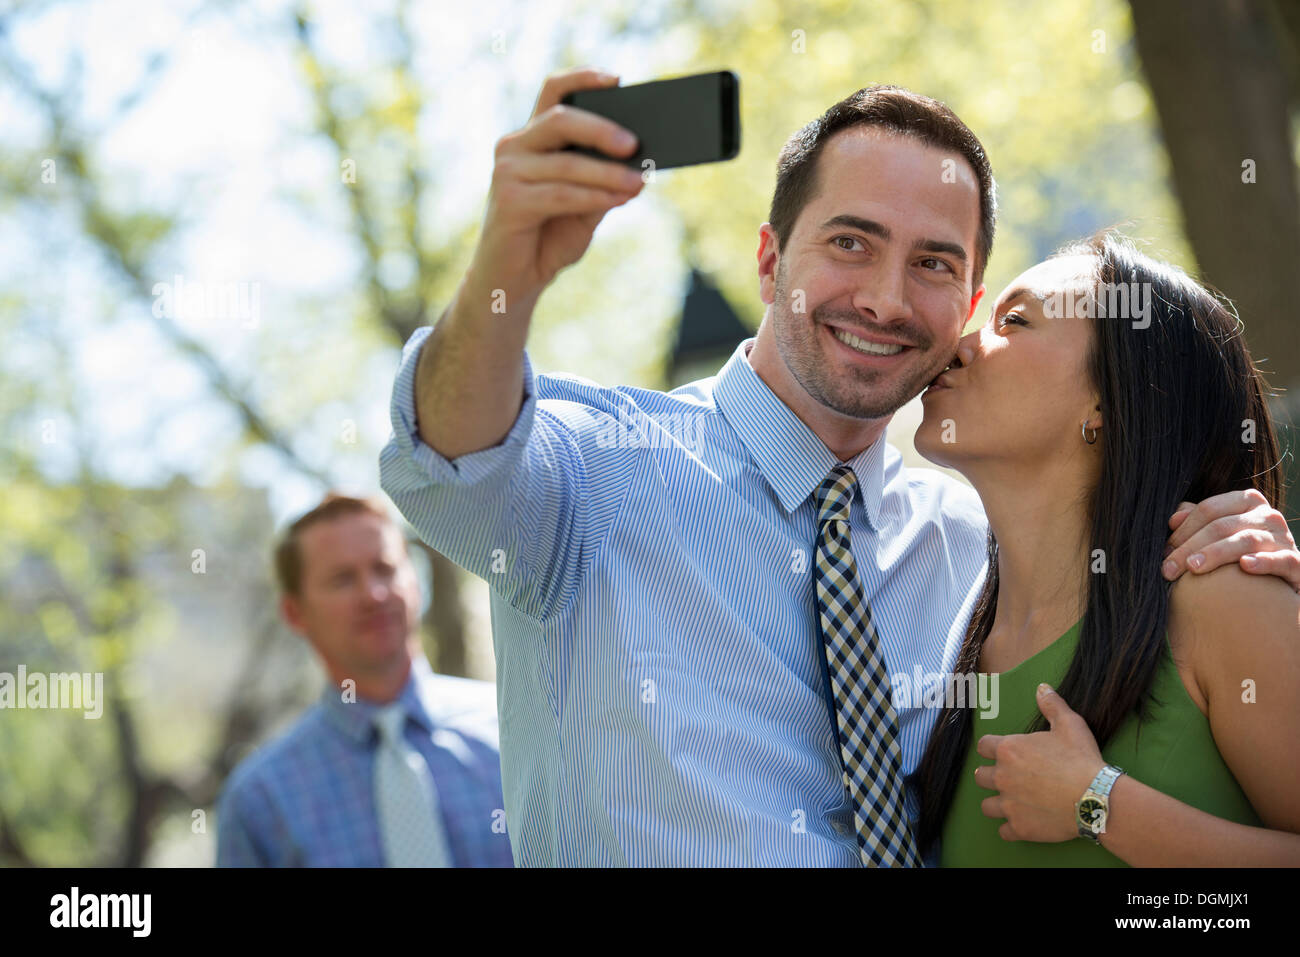 A businesswoman and two businessmen outdoors in the city. Stock Photo